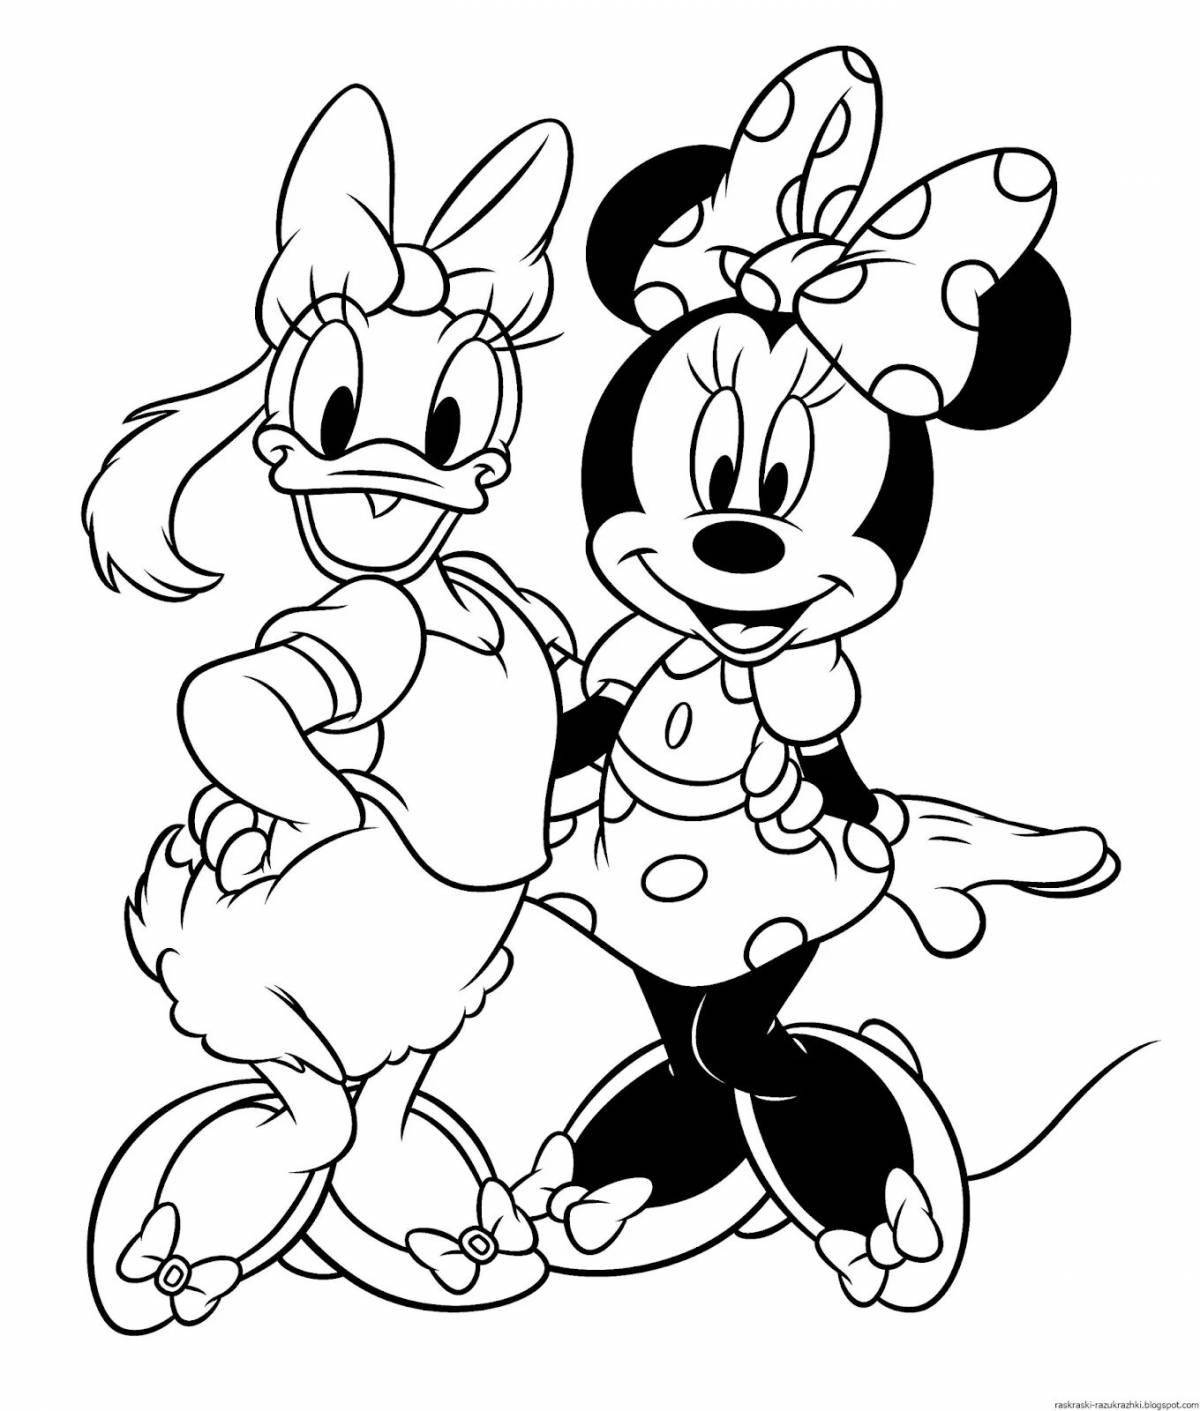 Cute minnie mouse coloring page